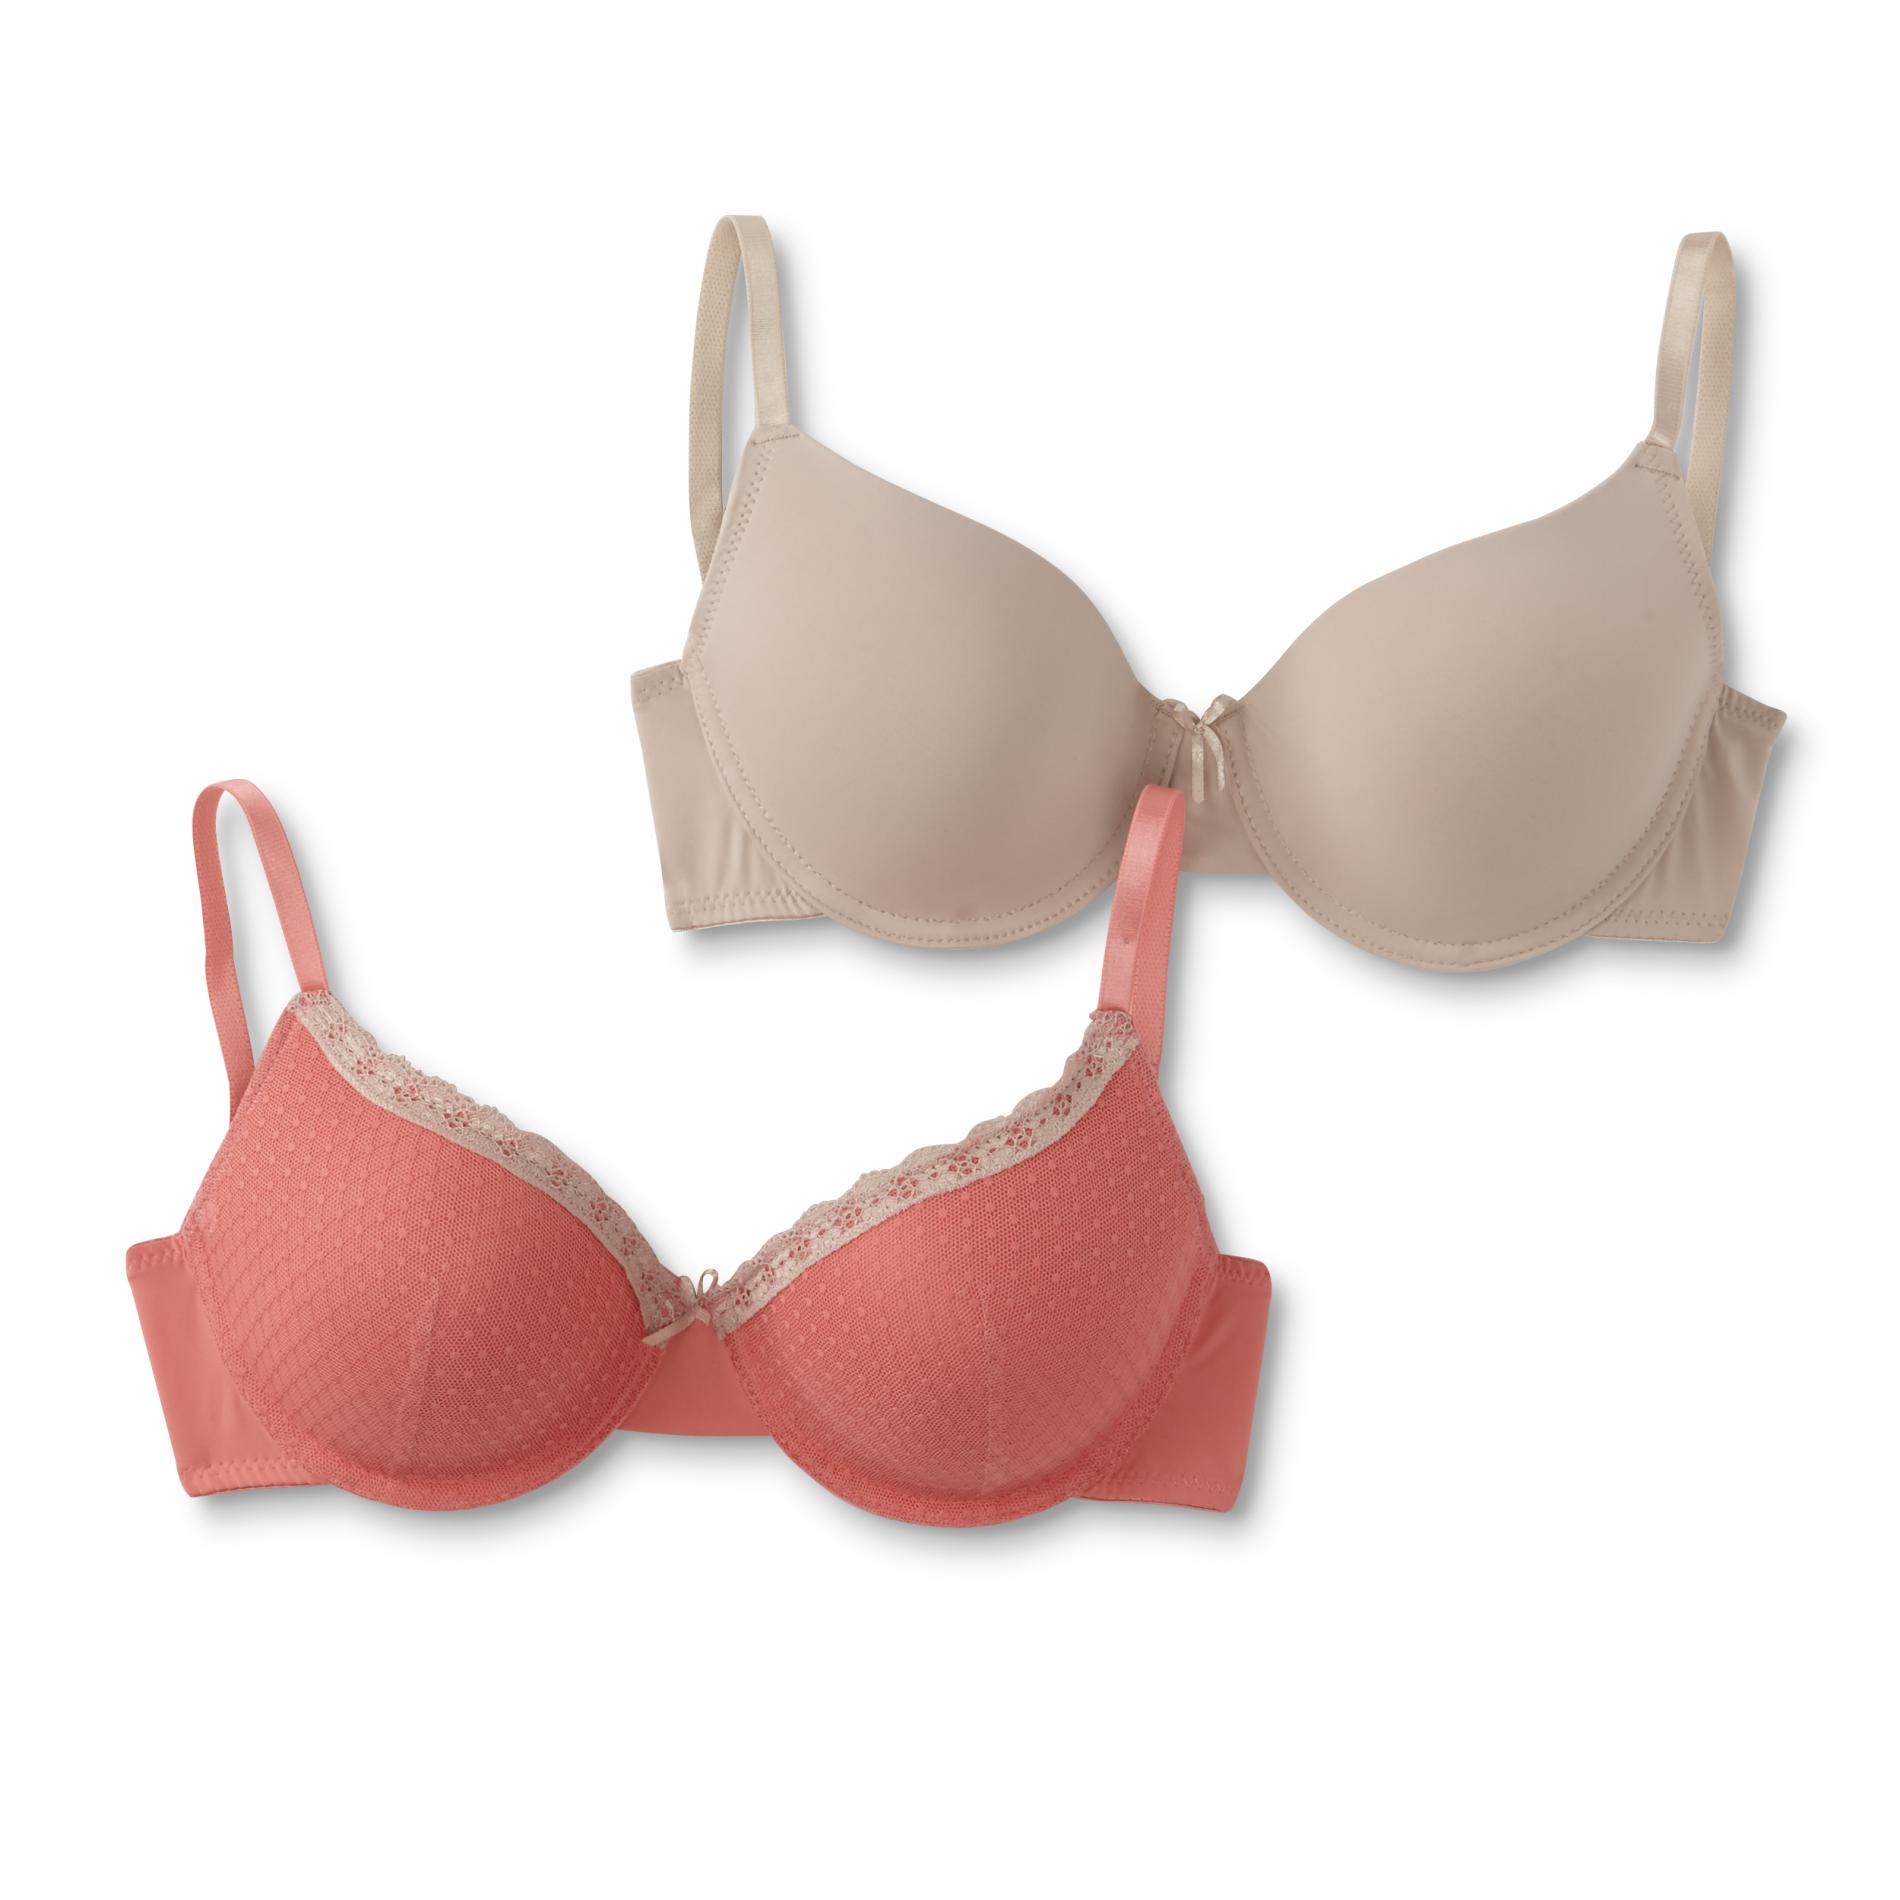 Simply Styled Women's 2-Pack T-Shirt Bras